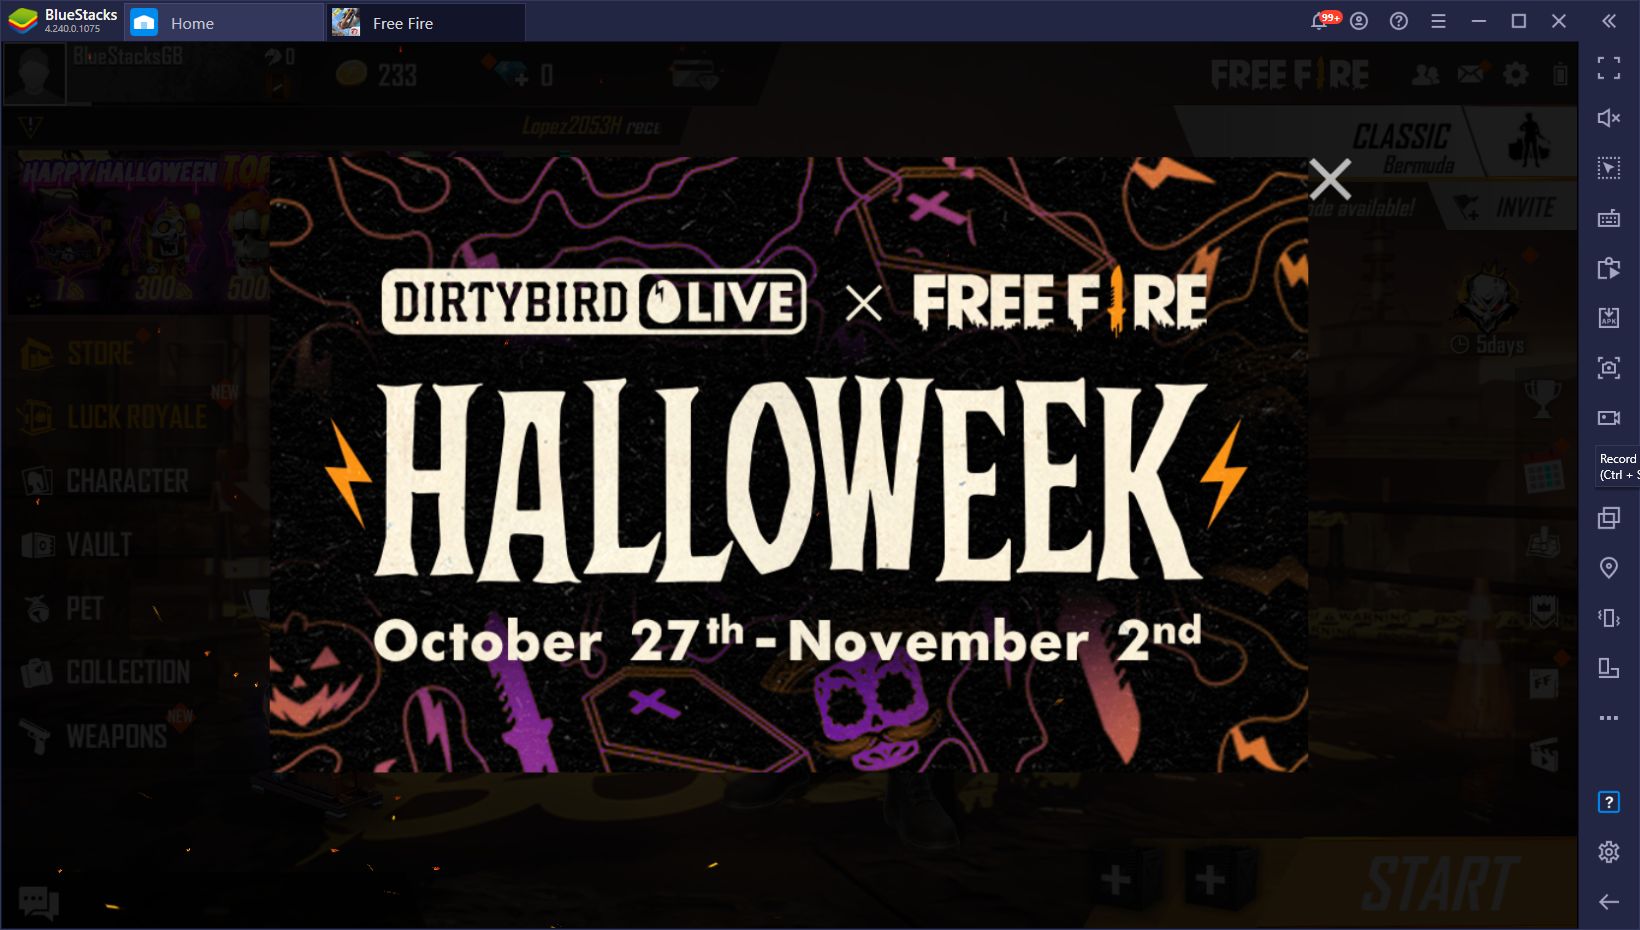 Free Fire Halloweek Guide – All the Details About the Halloween 2020 Celebration